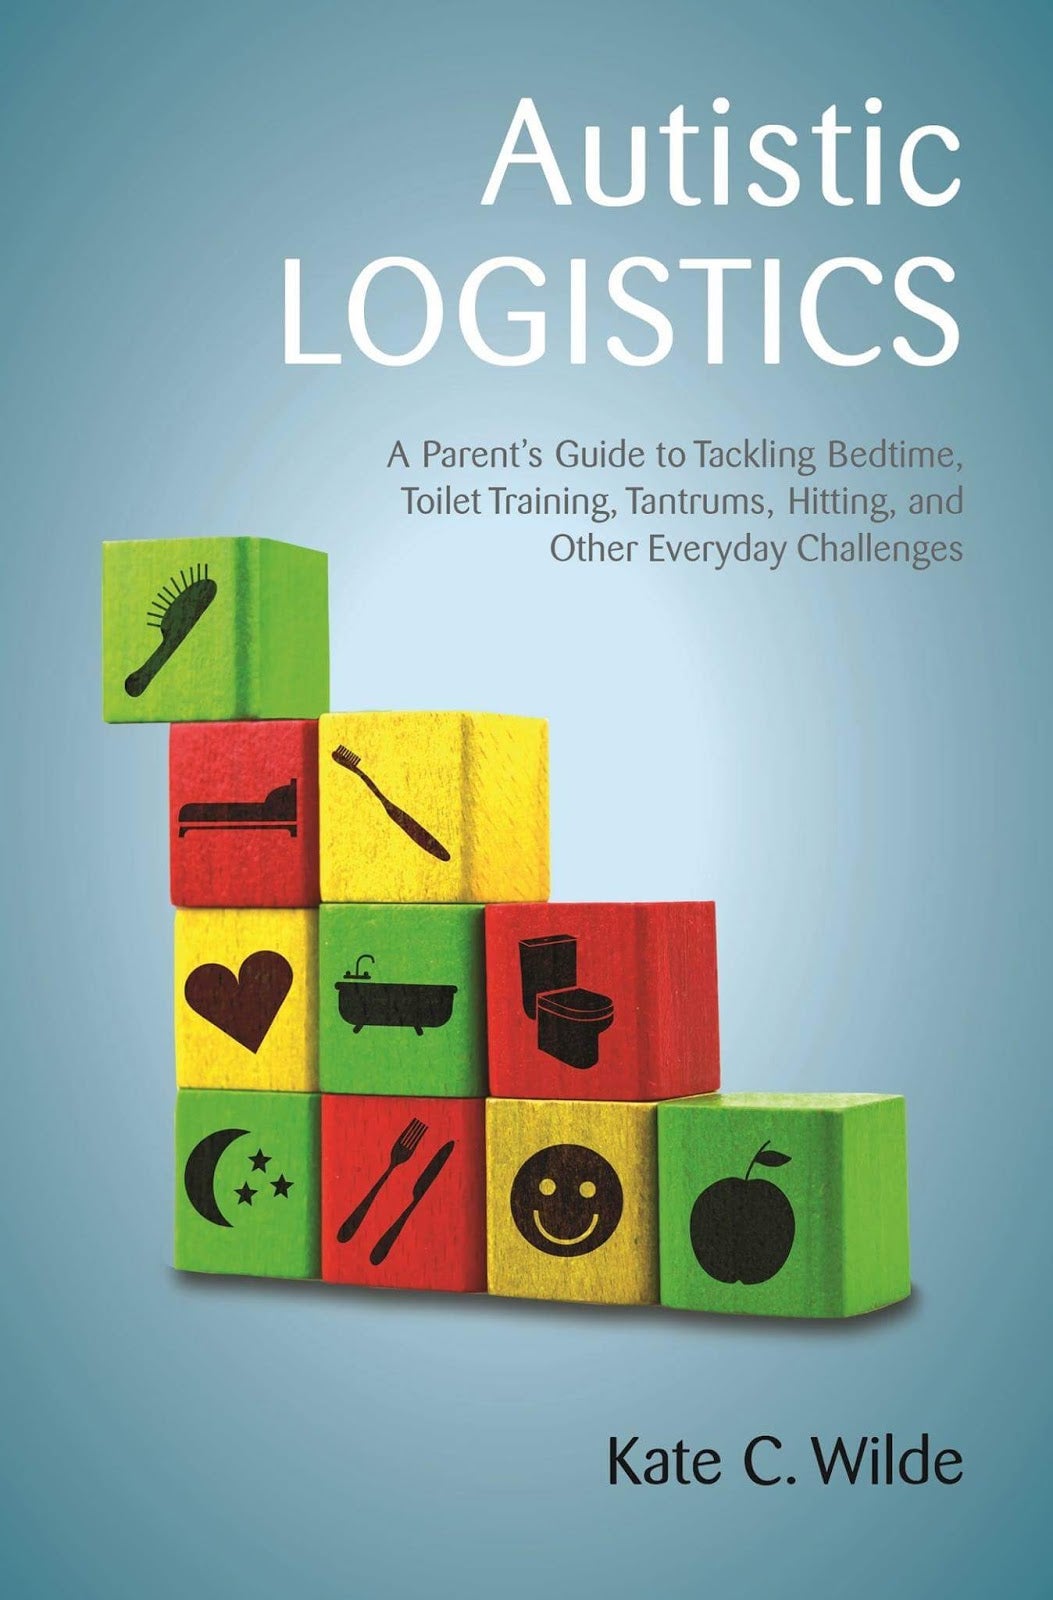 Autistic Logistics: A Parent's Guide to Tackling Bedtime, Toilet Training, Tantrums, Hitting, and Other Everyday Challenges - Kate Wilde